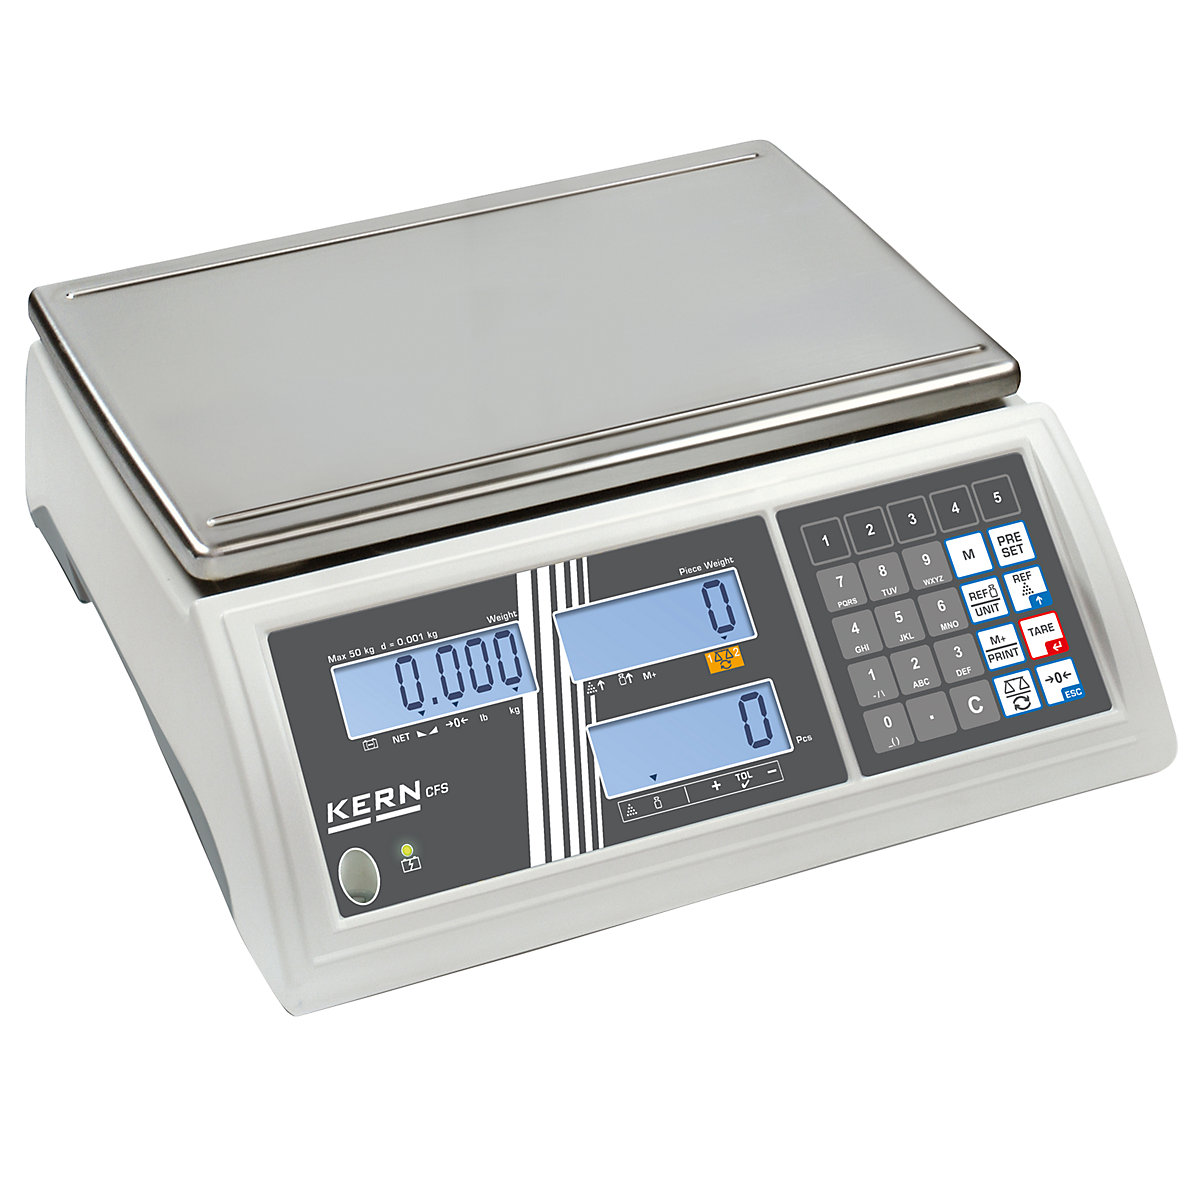 Counting scales – KERN, high resolution, weighing range up to 50 kg, read-out accuracy 1 g, weighing plate 370 x 240 mm-3